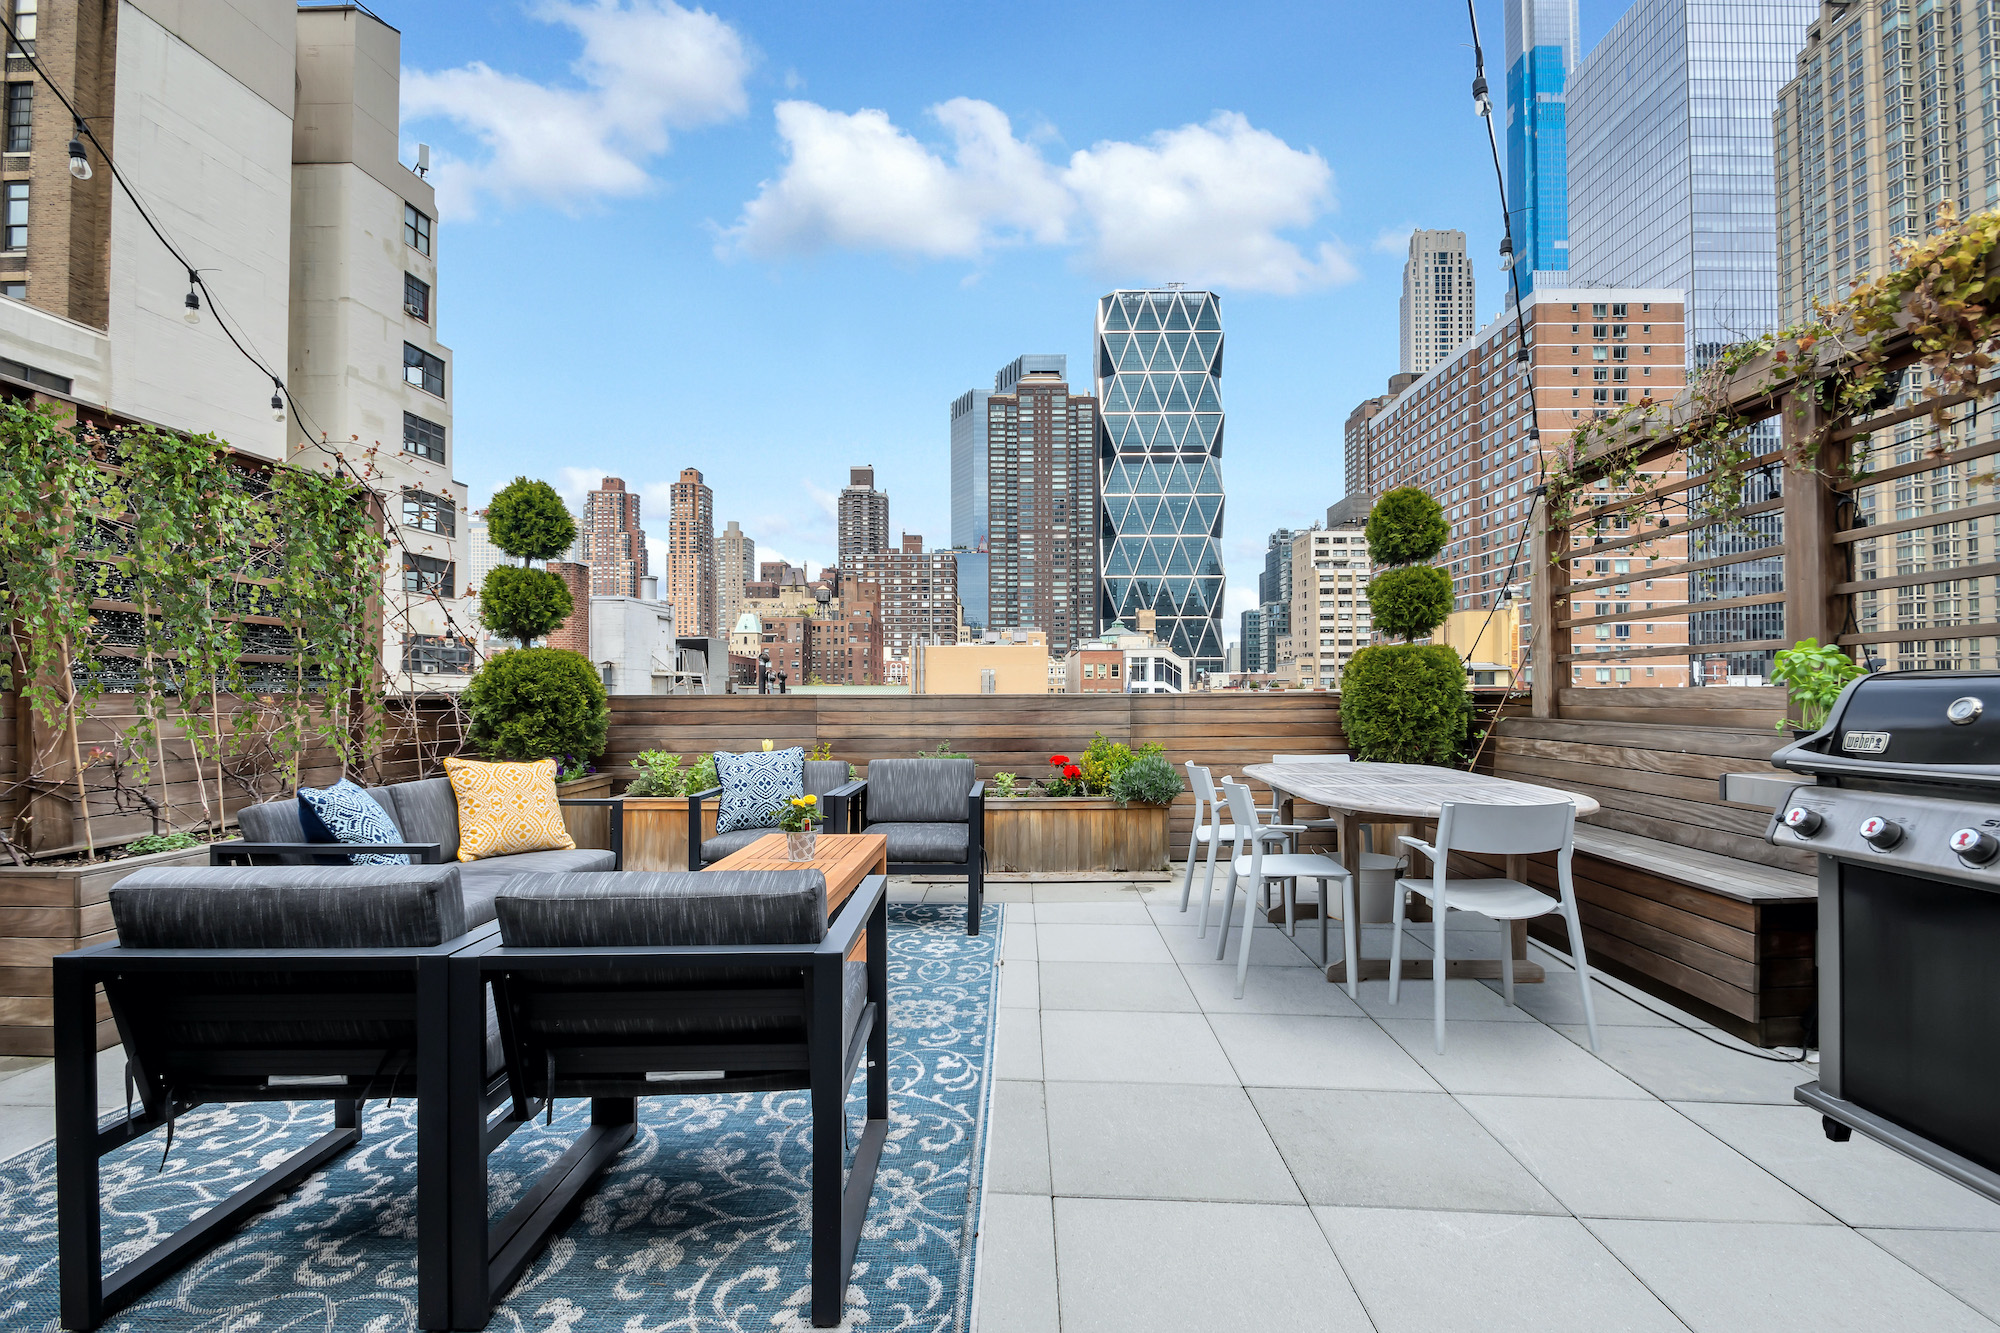 In Hell’s Kitchen, this $2.3M penthouse has a roof deck with views of Billionaires’ Row